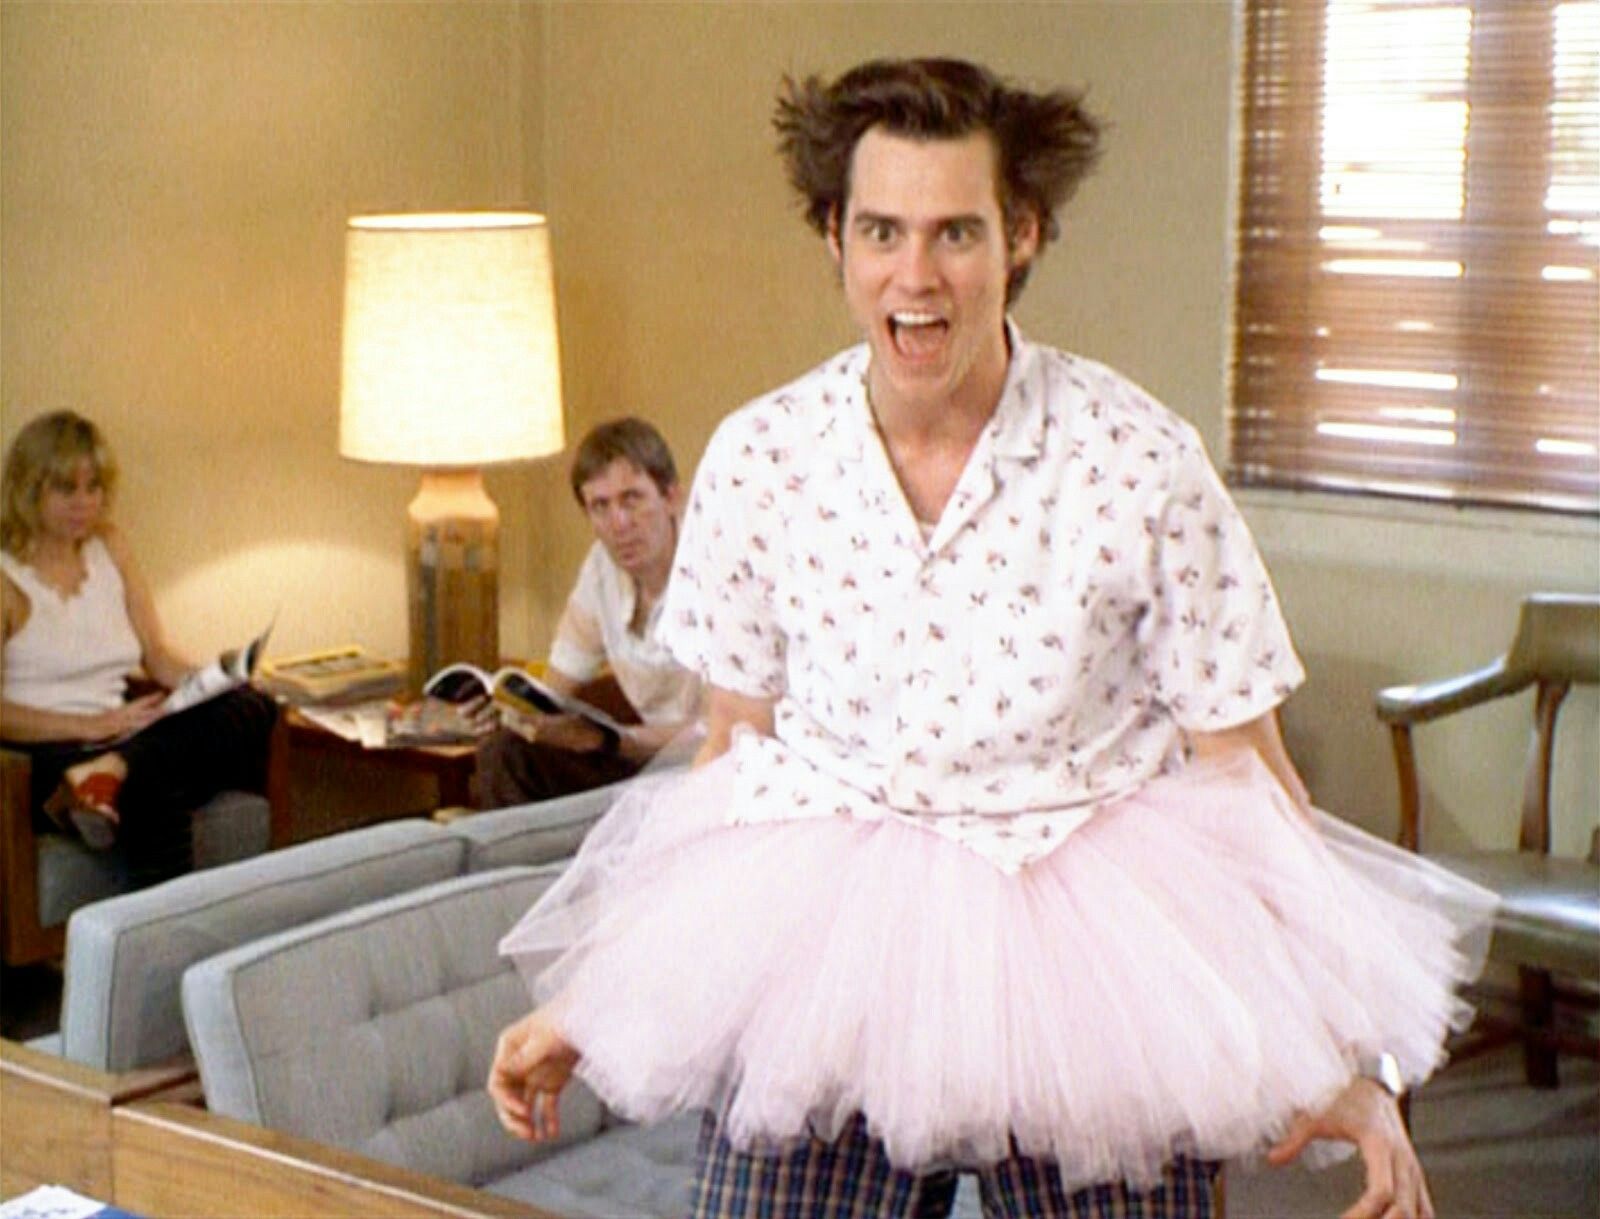 Ace Ventura Tutu - Why This Costume Gained So Much Popularity?